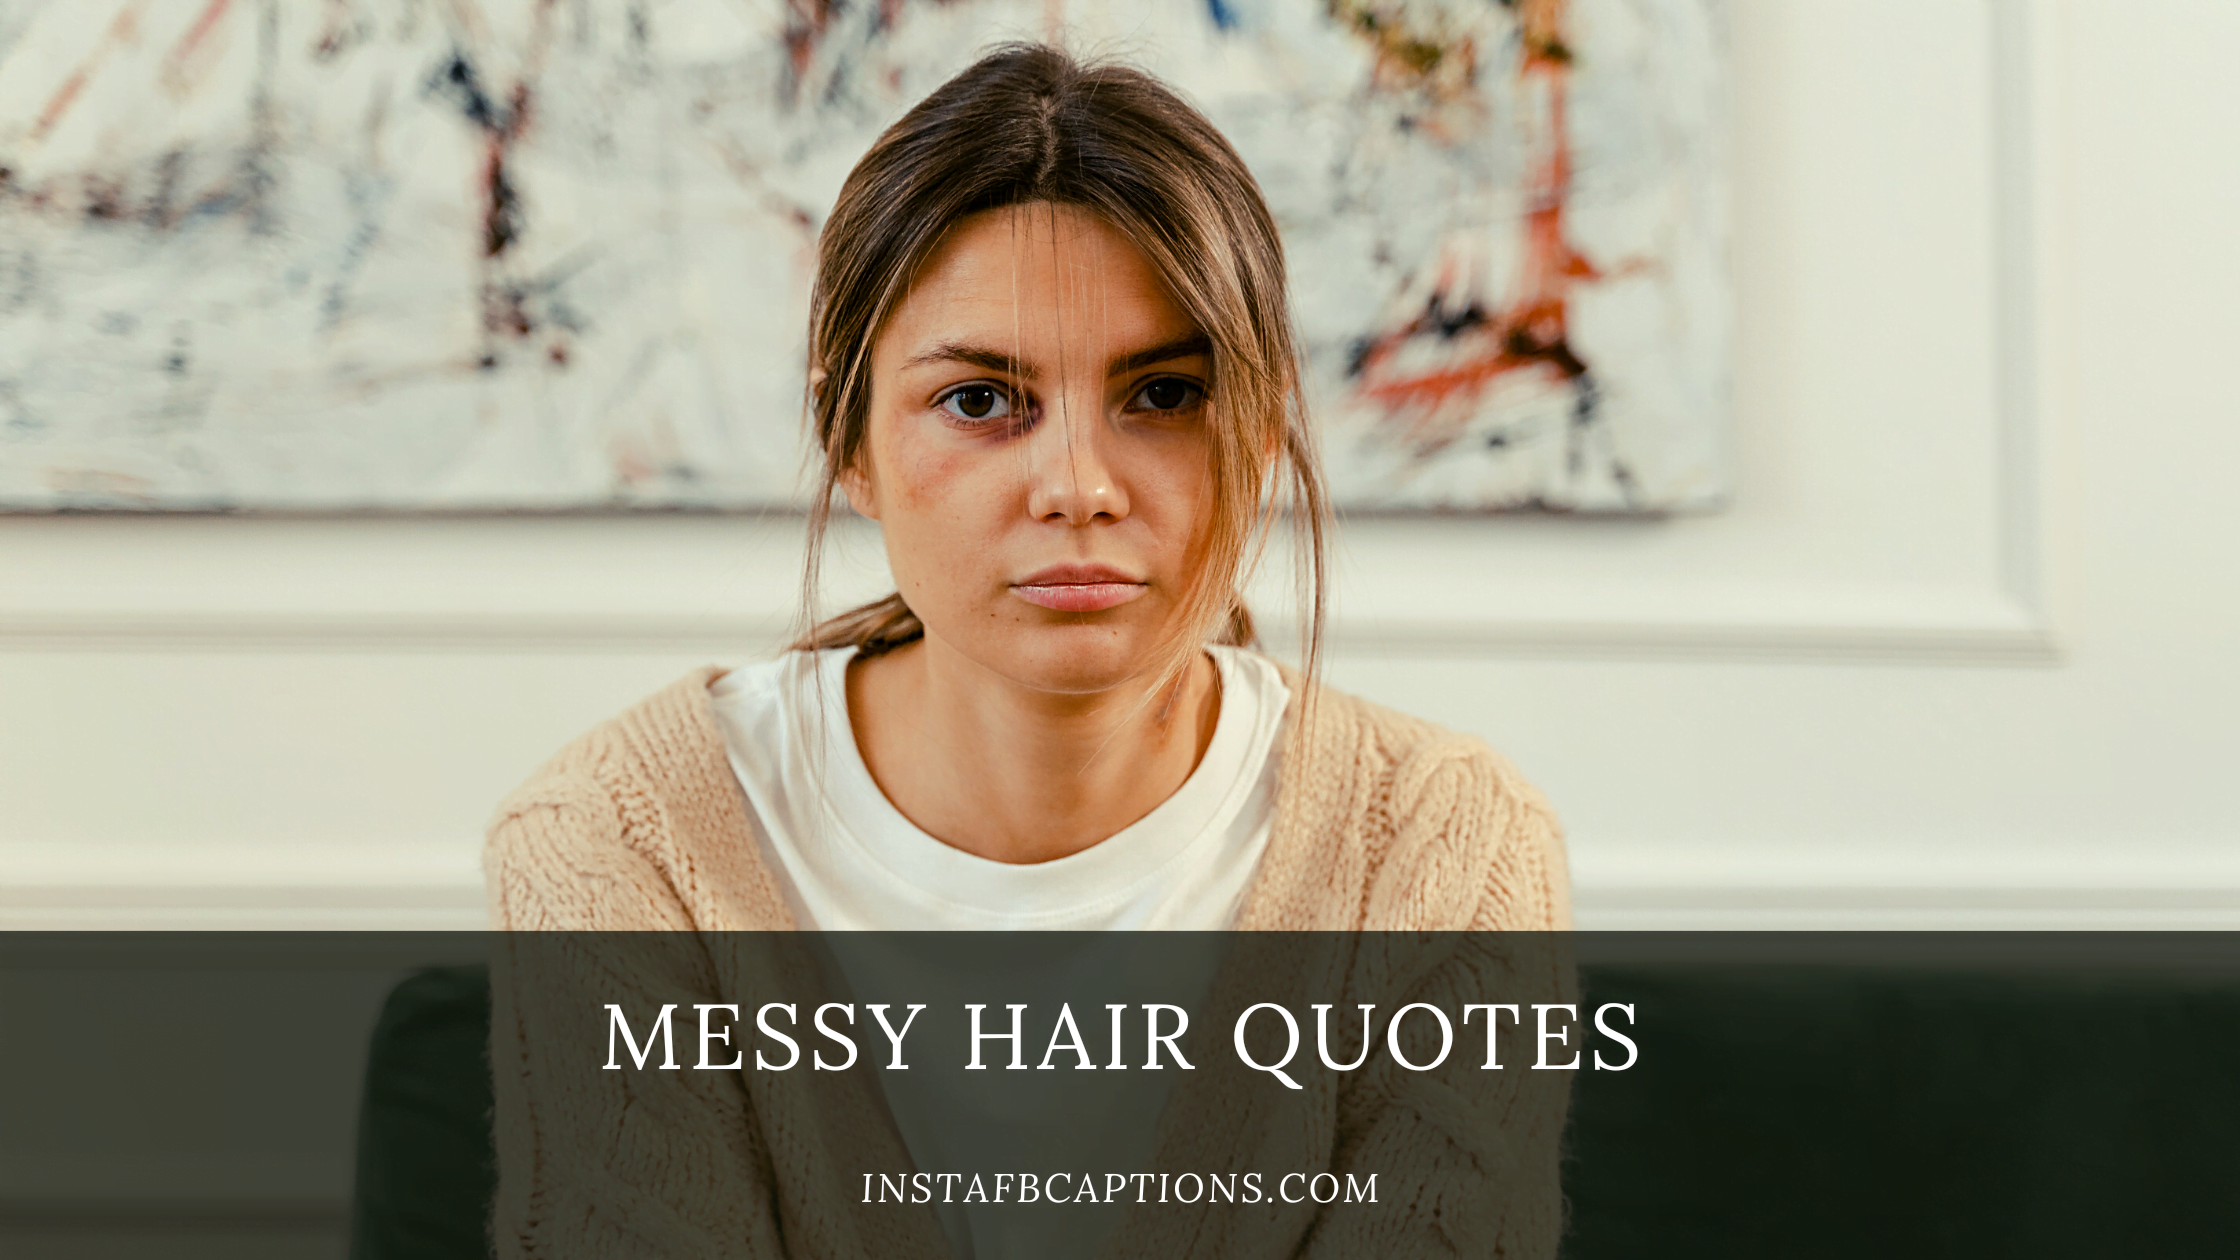 Messy Hair Quotes  - Messy Hair Quotes - 112 Messy Hair Instagram Captions Quotes in 2023